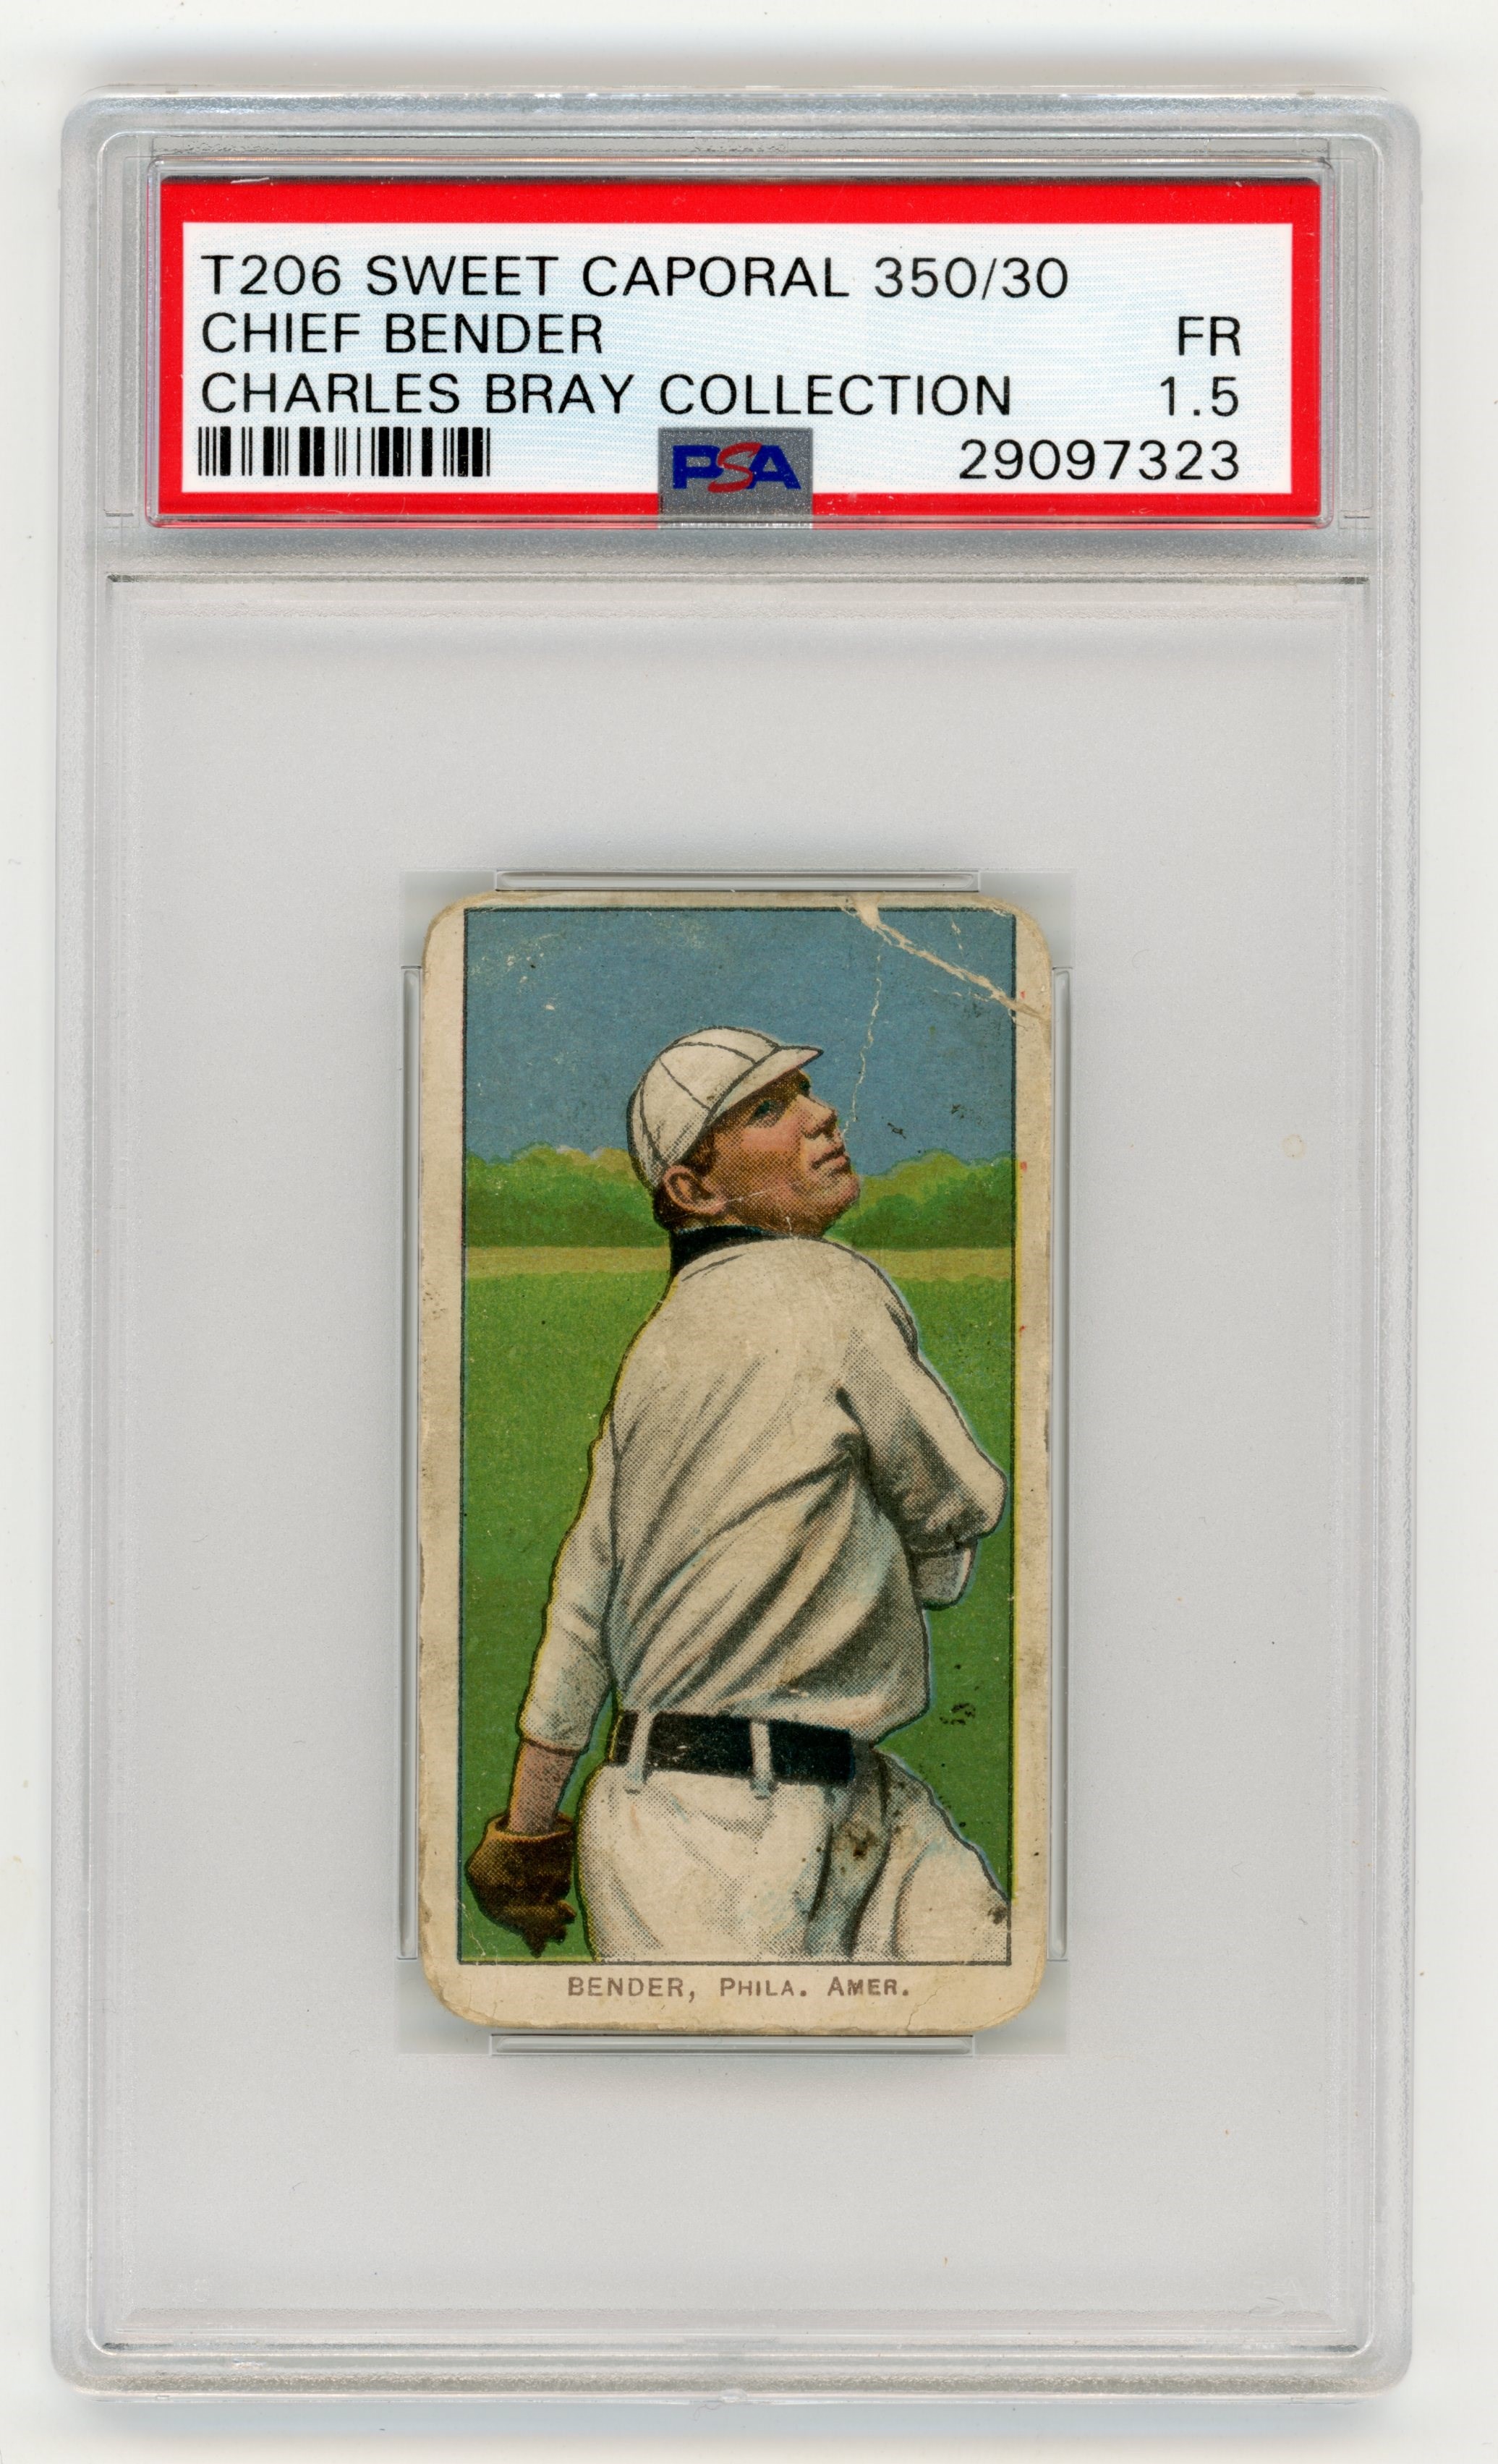 Baseball and Trading Cards - T206 Sweet Caporal 350/30 Chief Bender PSA 1.5 From Charles Bray Collection